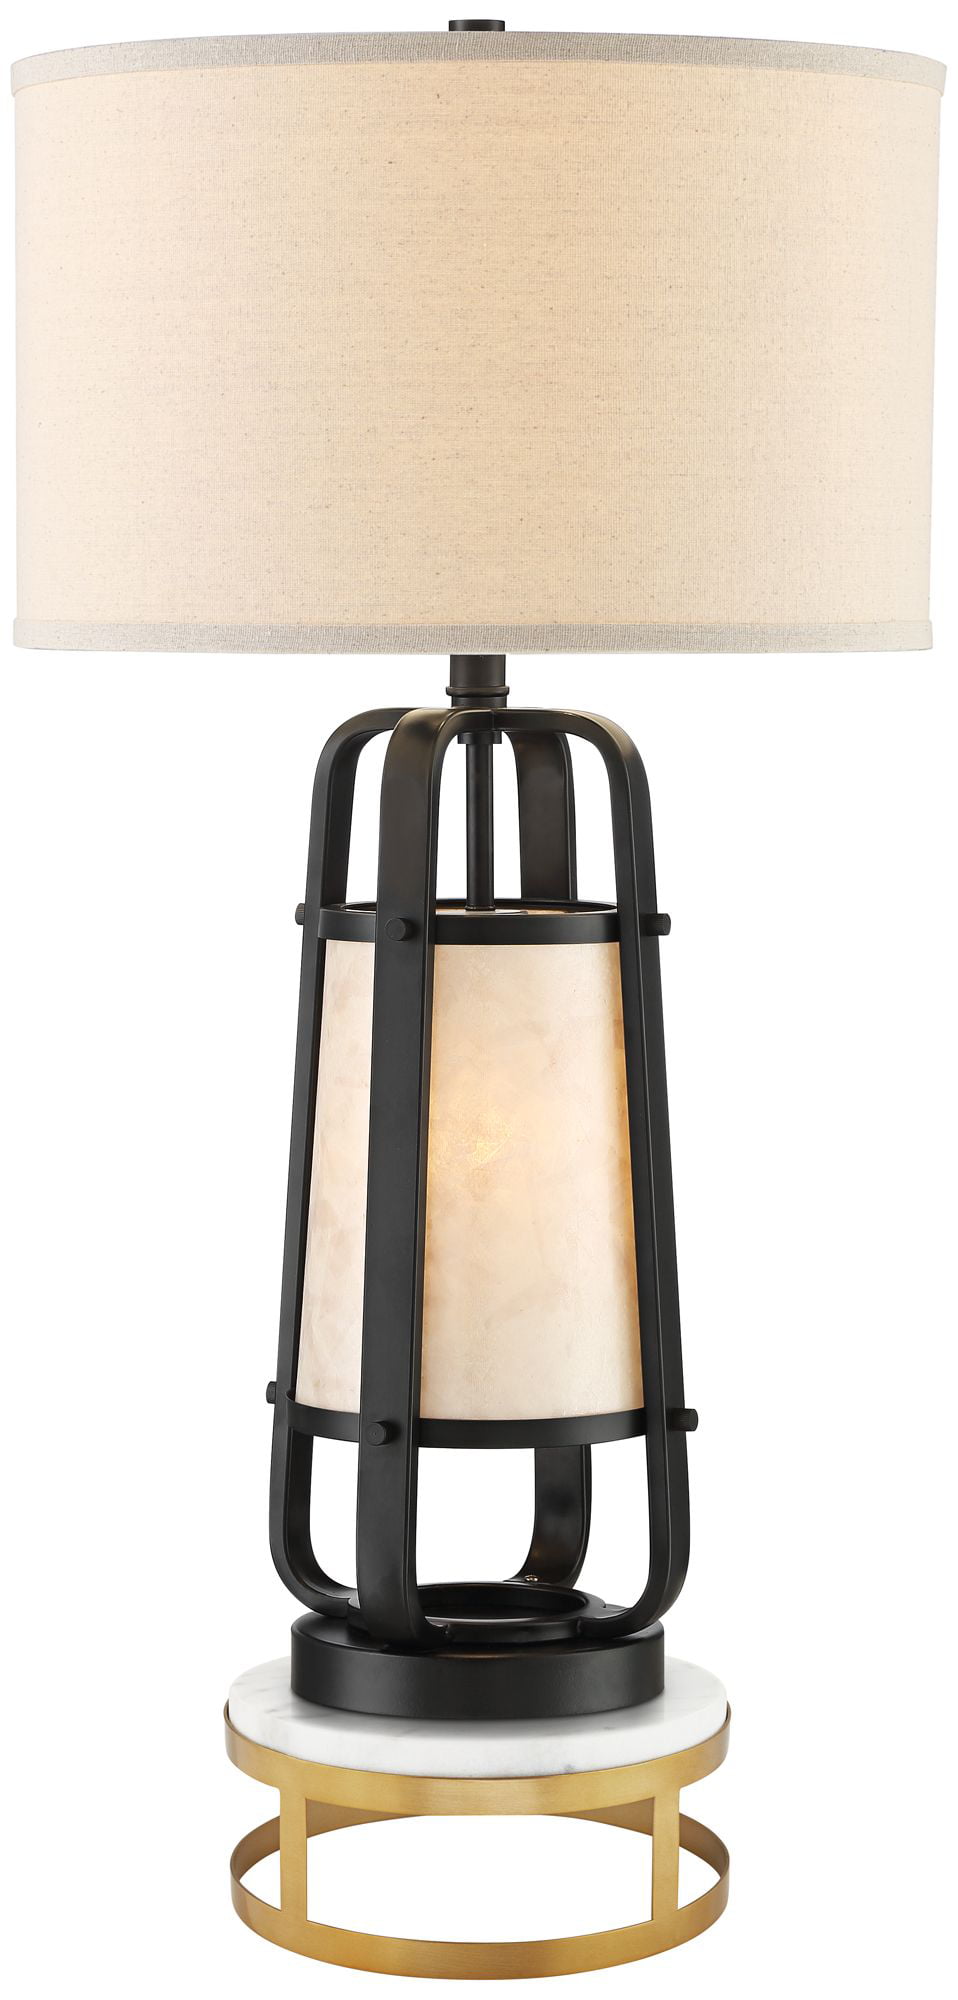 Franklin Iron Works Stacey Natural Mica, Marcel Led Night Light Table Lamp